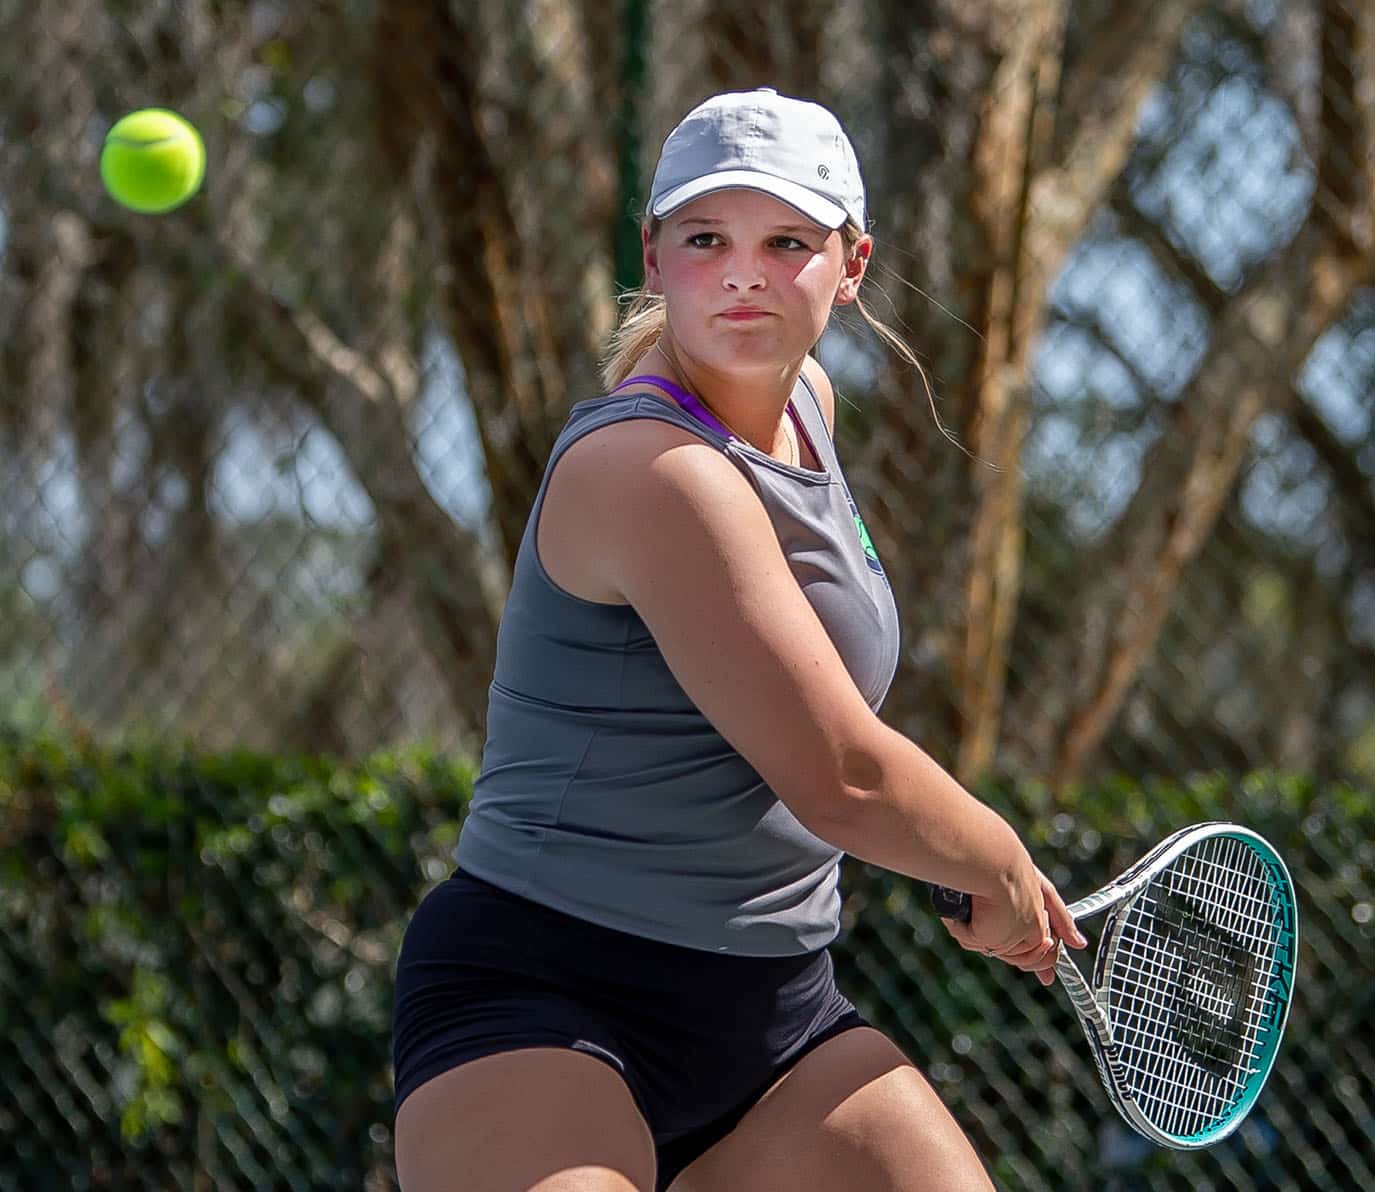 Central High’s Natalie Kupres zeroes in on a backhand in a doubles match with Hernando High Tuesday in Brooksville. Photo by JOE DiCRISTOFALO